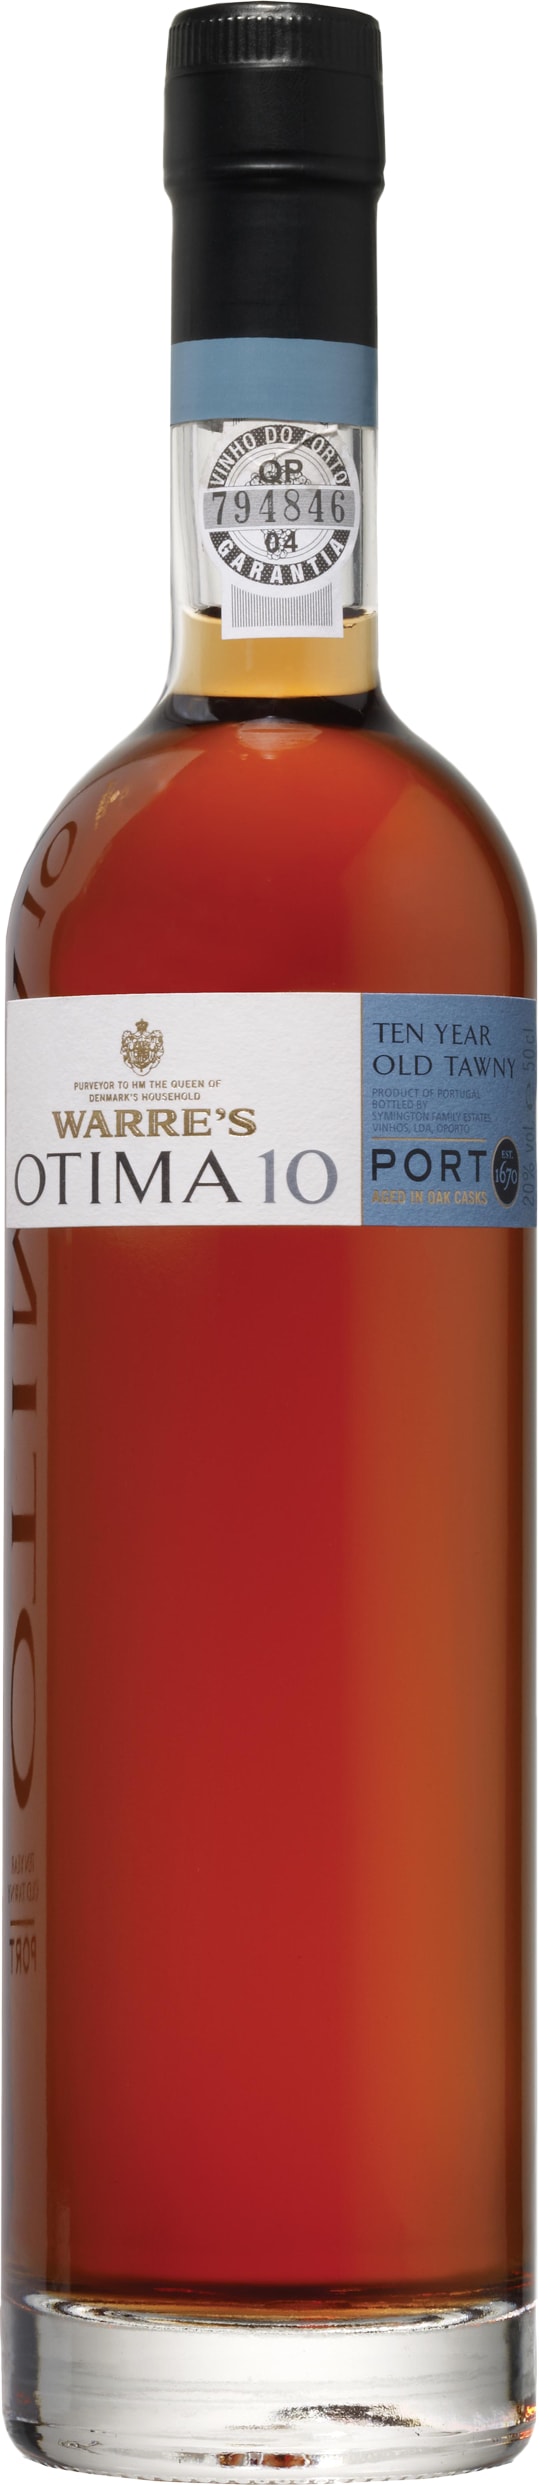 Warres Otima 10yo Tawny 50cl NV - Buy Warres Wines from GREAT WINES DIRECT wine shop